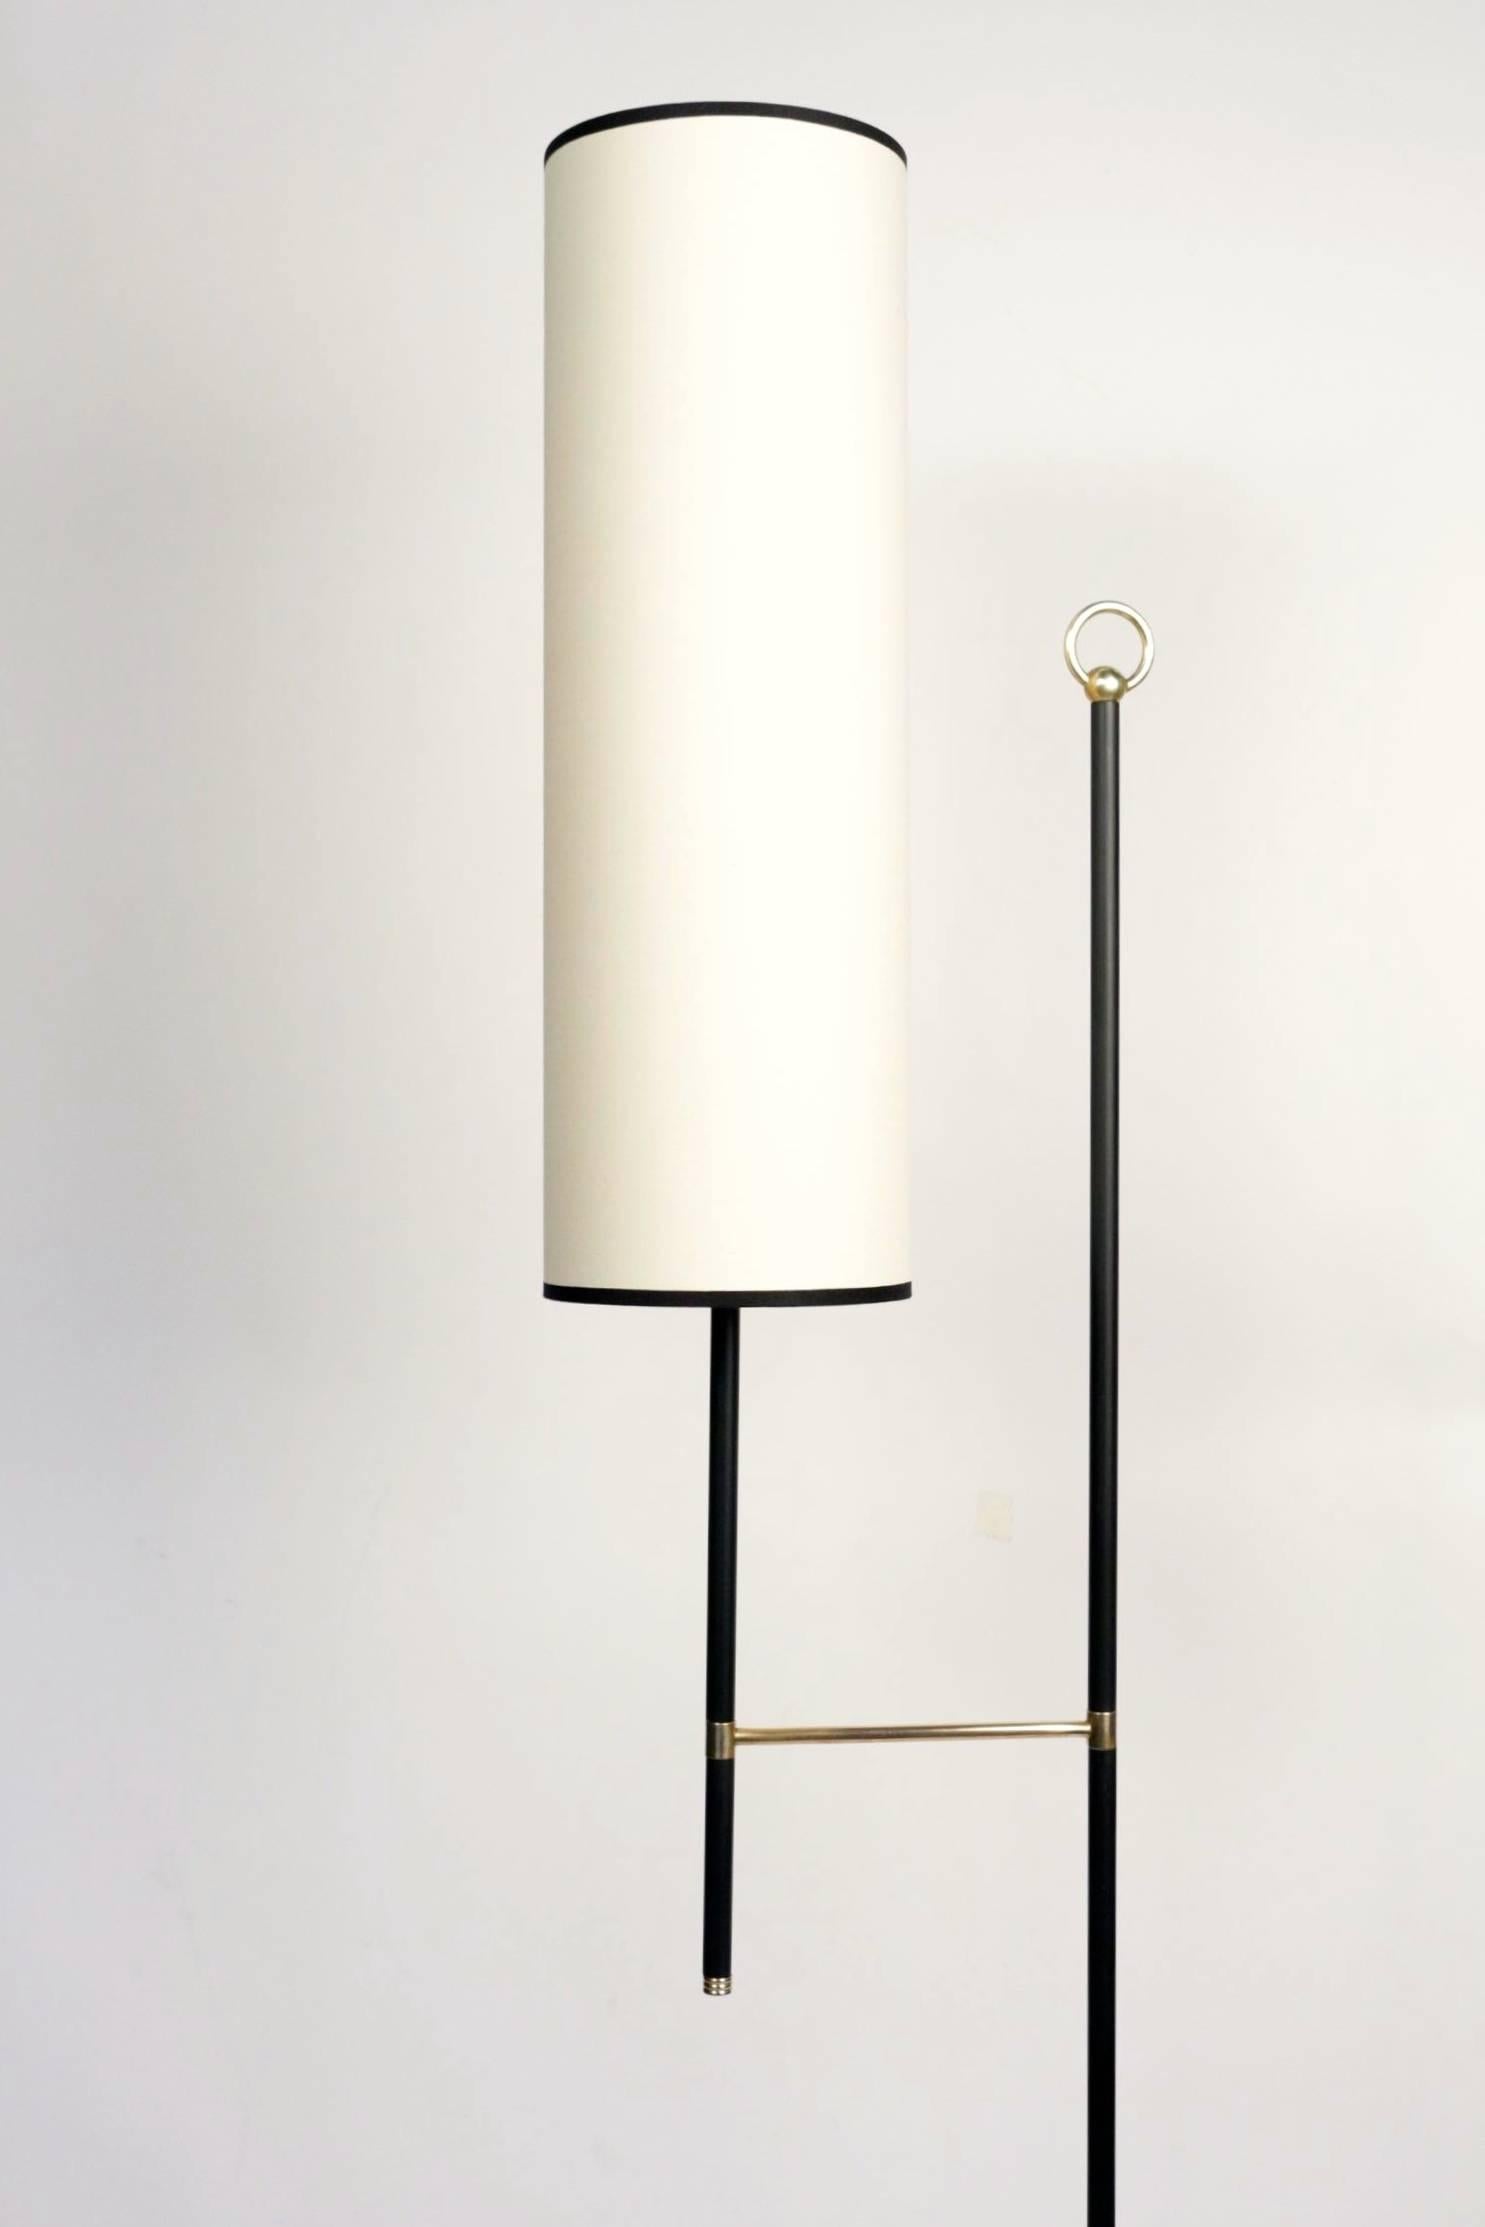 1950s floor lamp by Maison Lunel.
Composed of a stem decorated on its upper part with a gilt brass buckle and on its lower part by a gilt brass tripod base.
A second arm is attached at mid height by a vertical gilt brass rod.
This rod is